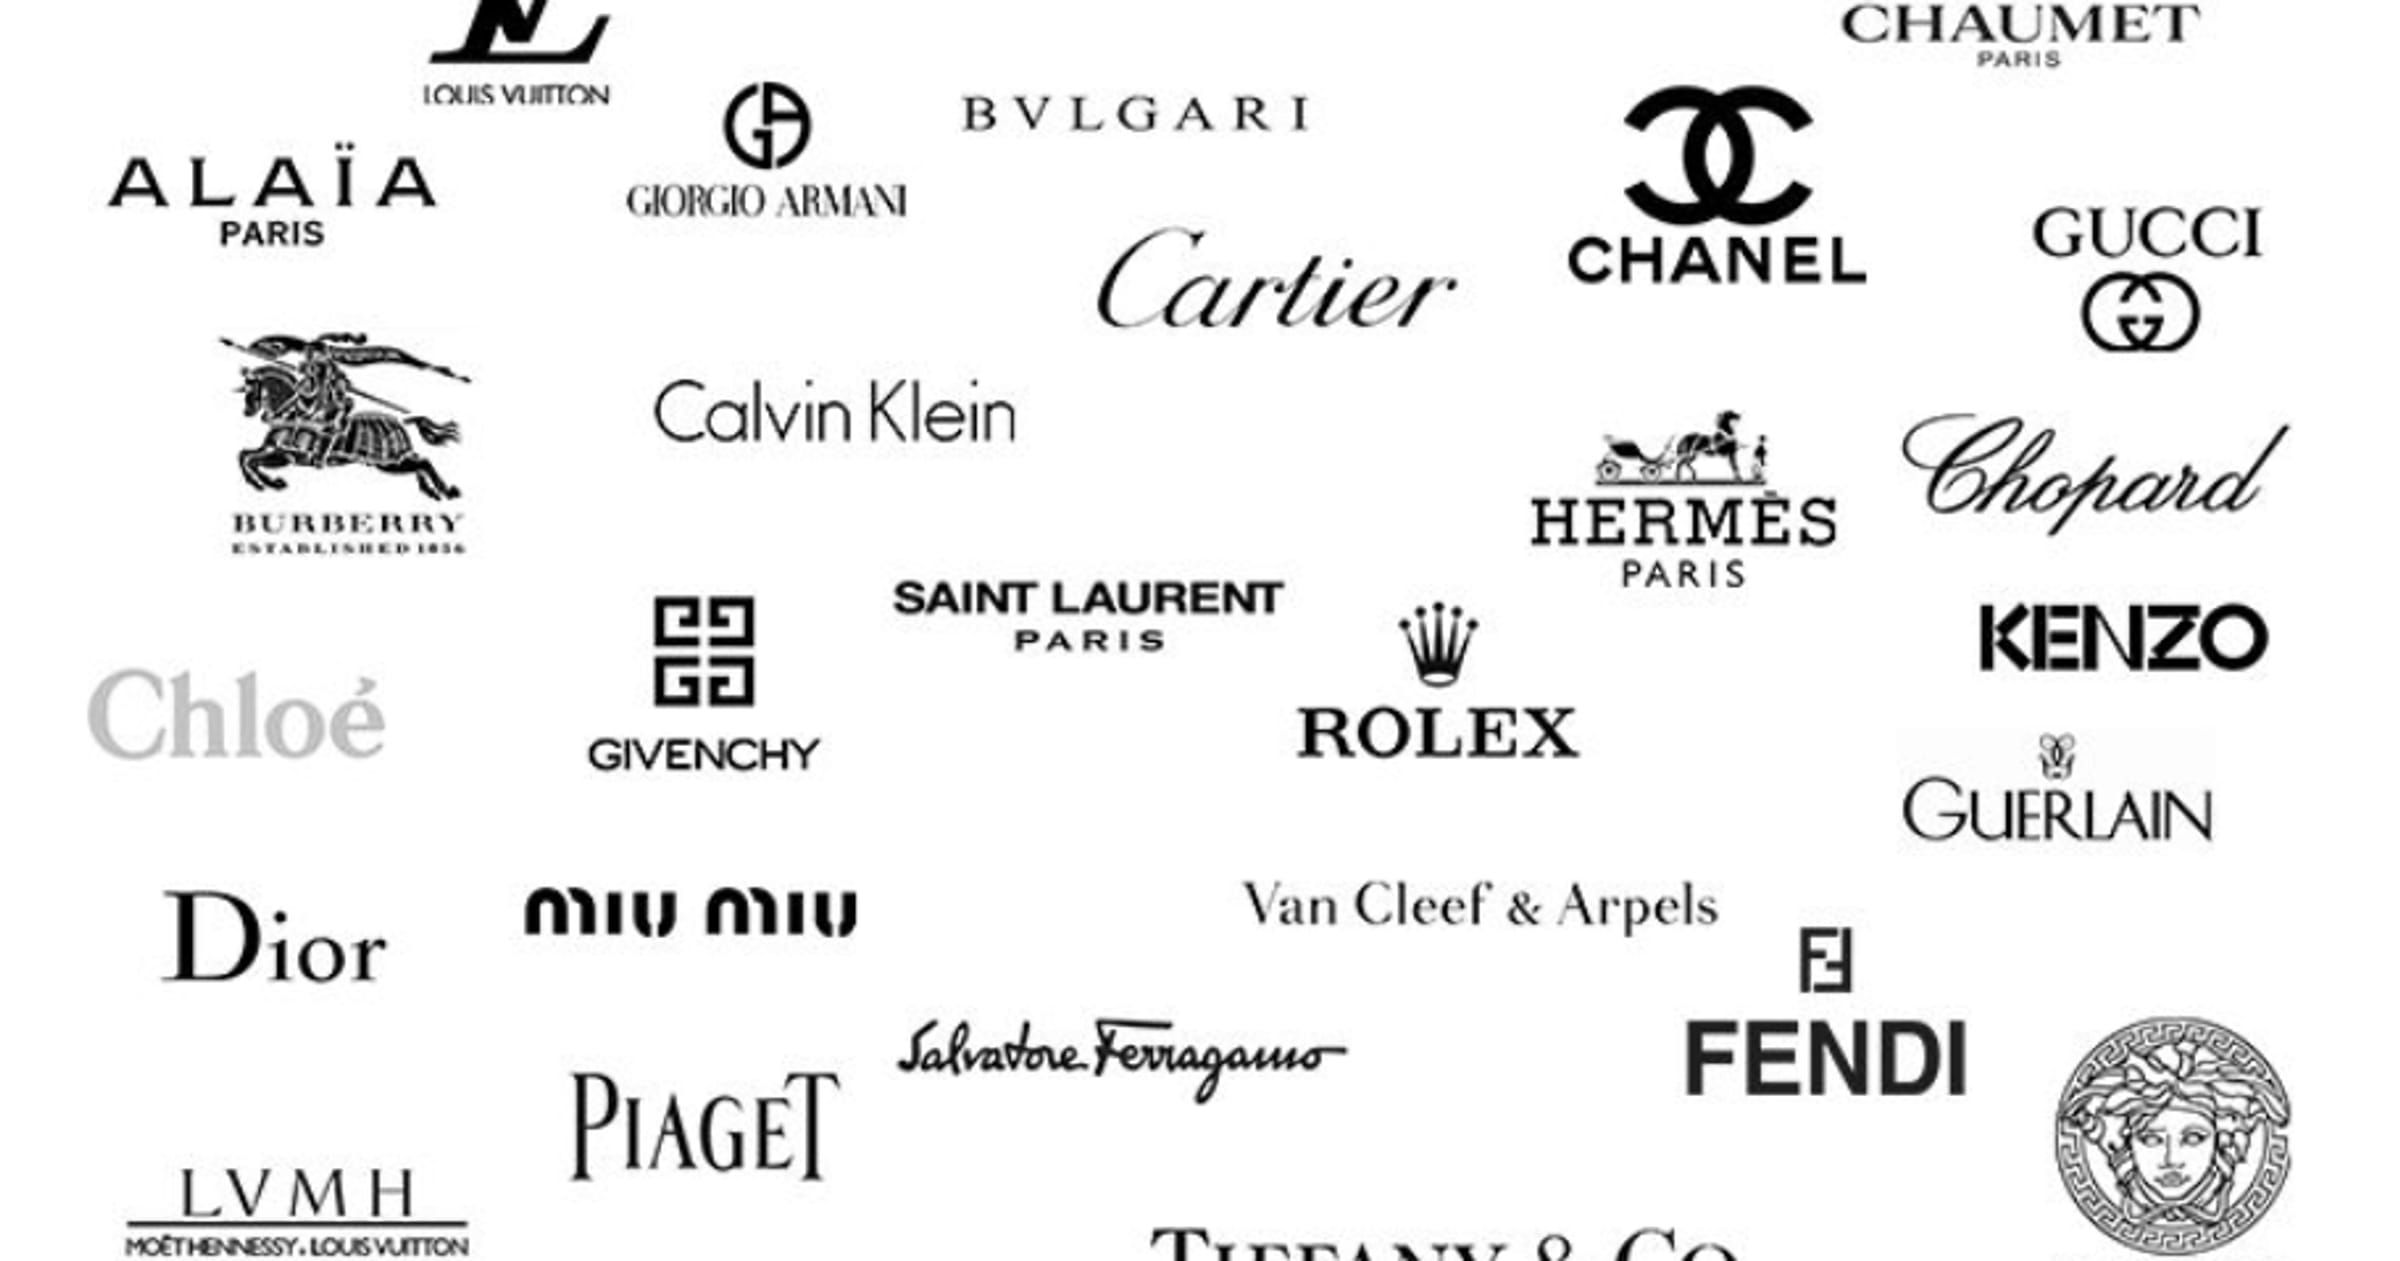 The Top 18 American Designers and Luxury Fashion Brands